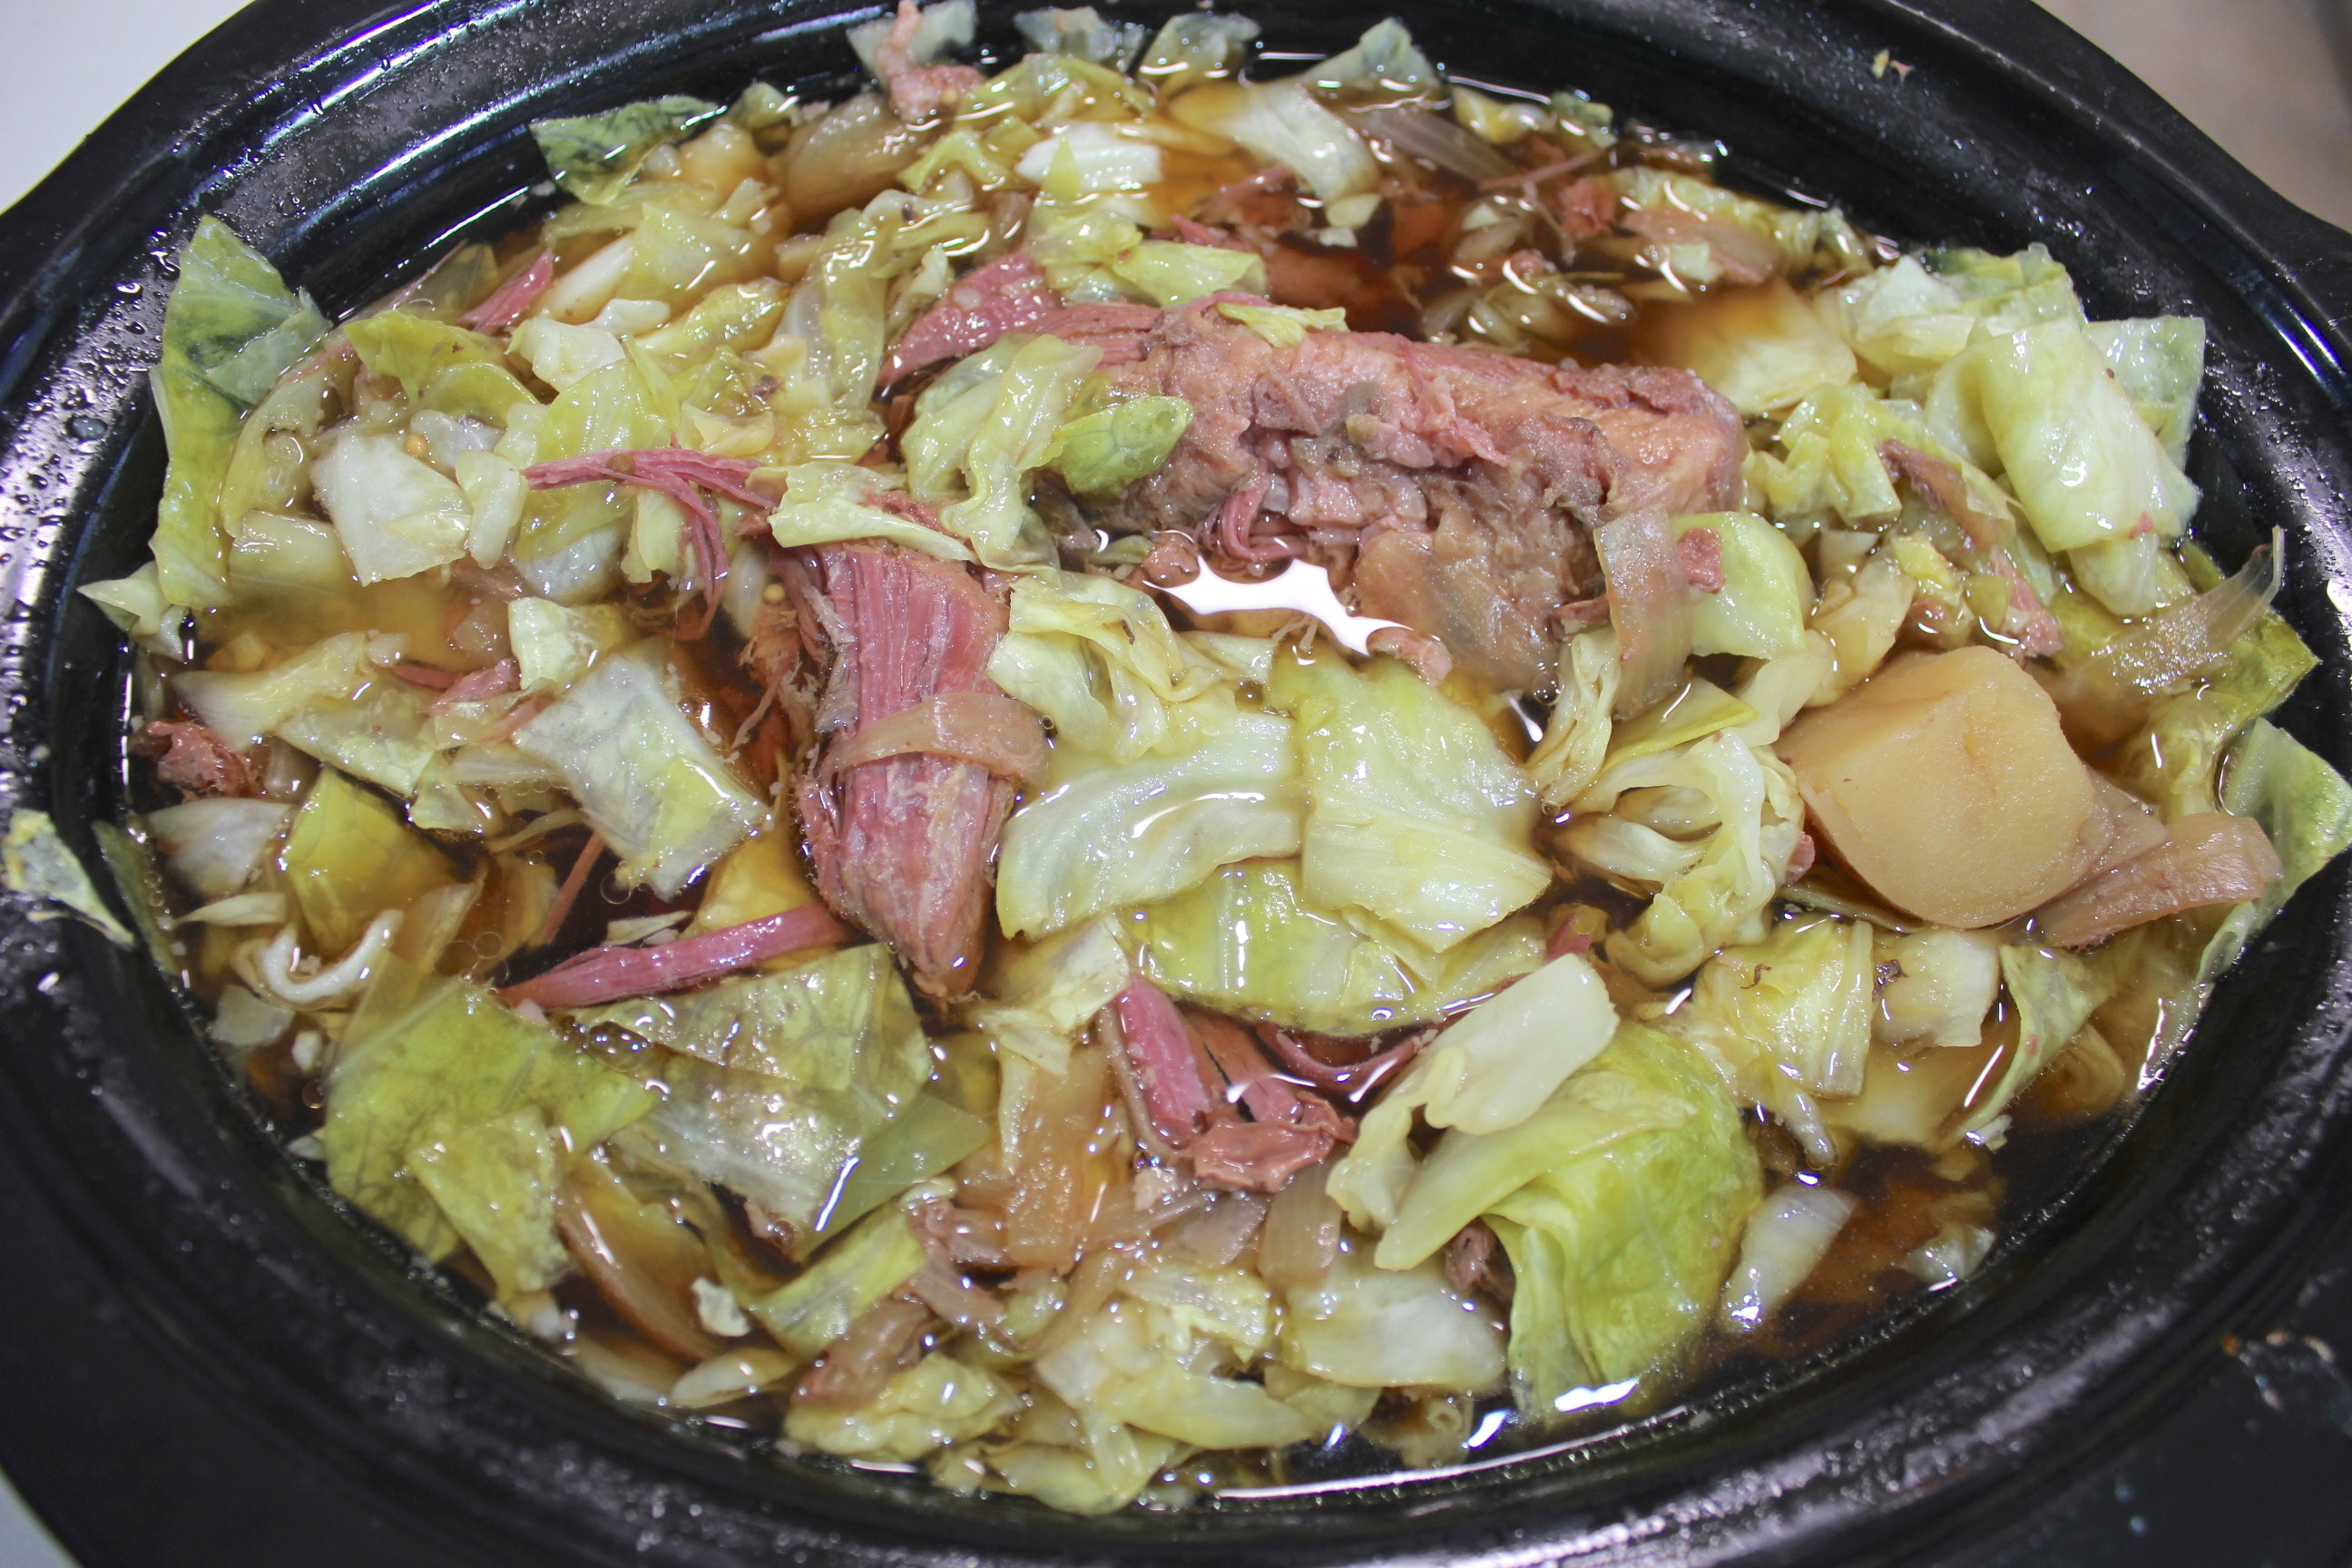 Slow cooker corned beef and cabbage recipe